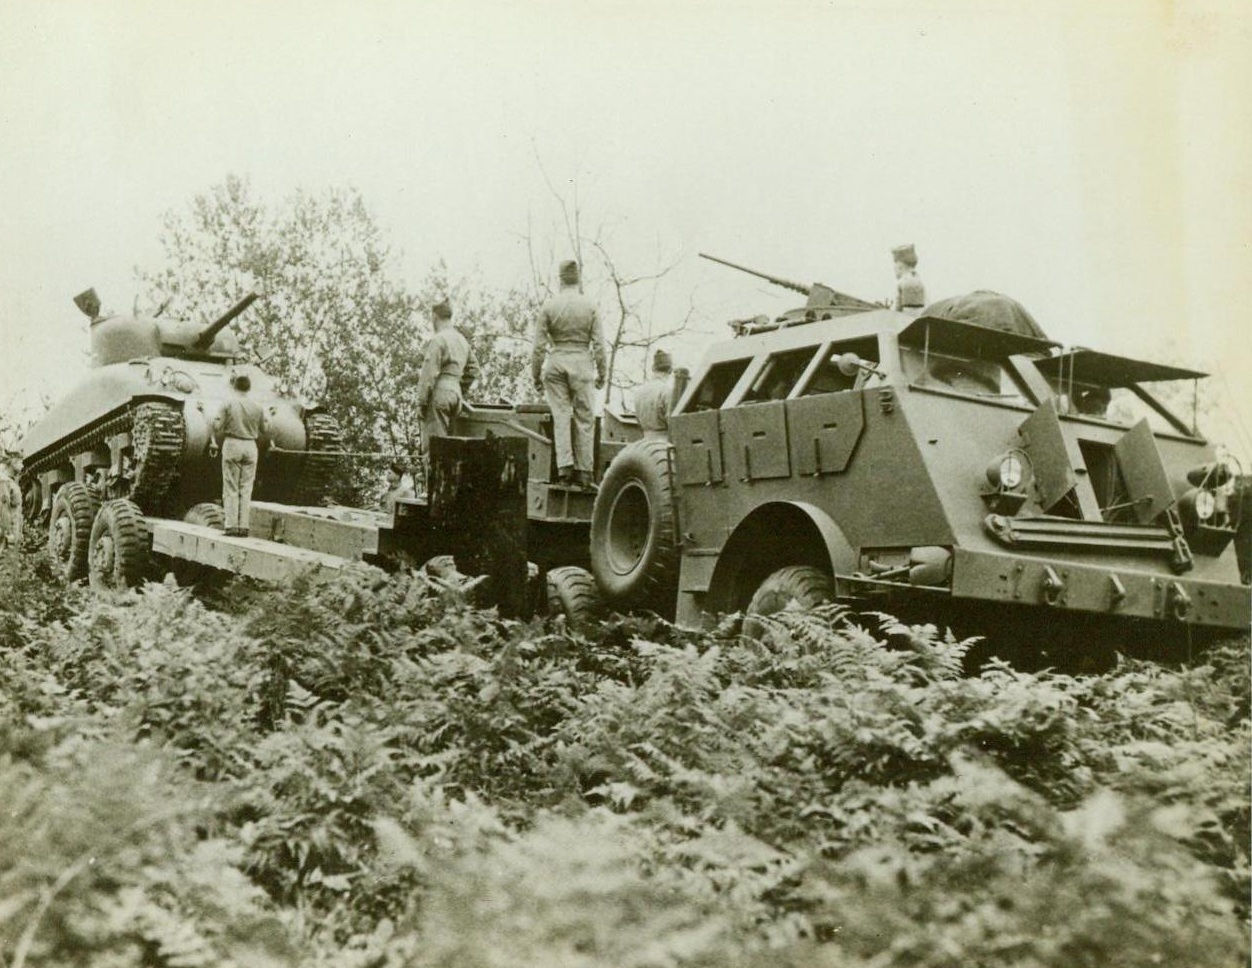 And Now, Tanks Ride To Battle, 10/28/1943. The tank recovery vehicle, known to the War Dep't as the M-25, takes on a tank. These gross vehicles, weighing over 40 tons carry tanks or armored vehicles to front lines and disabled ones from the battlefields for repairs. They make it possible for tanks to enter battle with full fuel tanks and cool motors. Each vehicle is armed to protect itself from enemy ground and air attack and can operate on its own for four days. 10/28/43 (ACME);